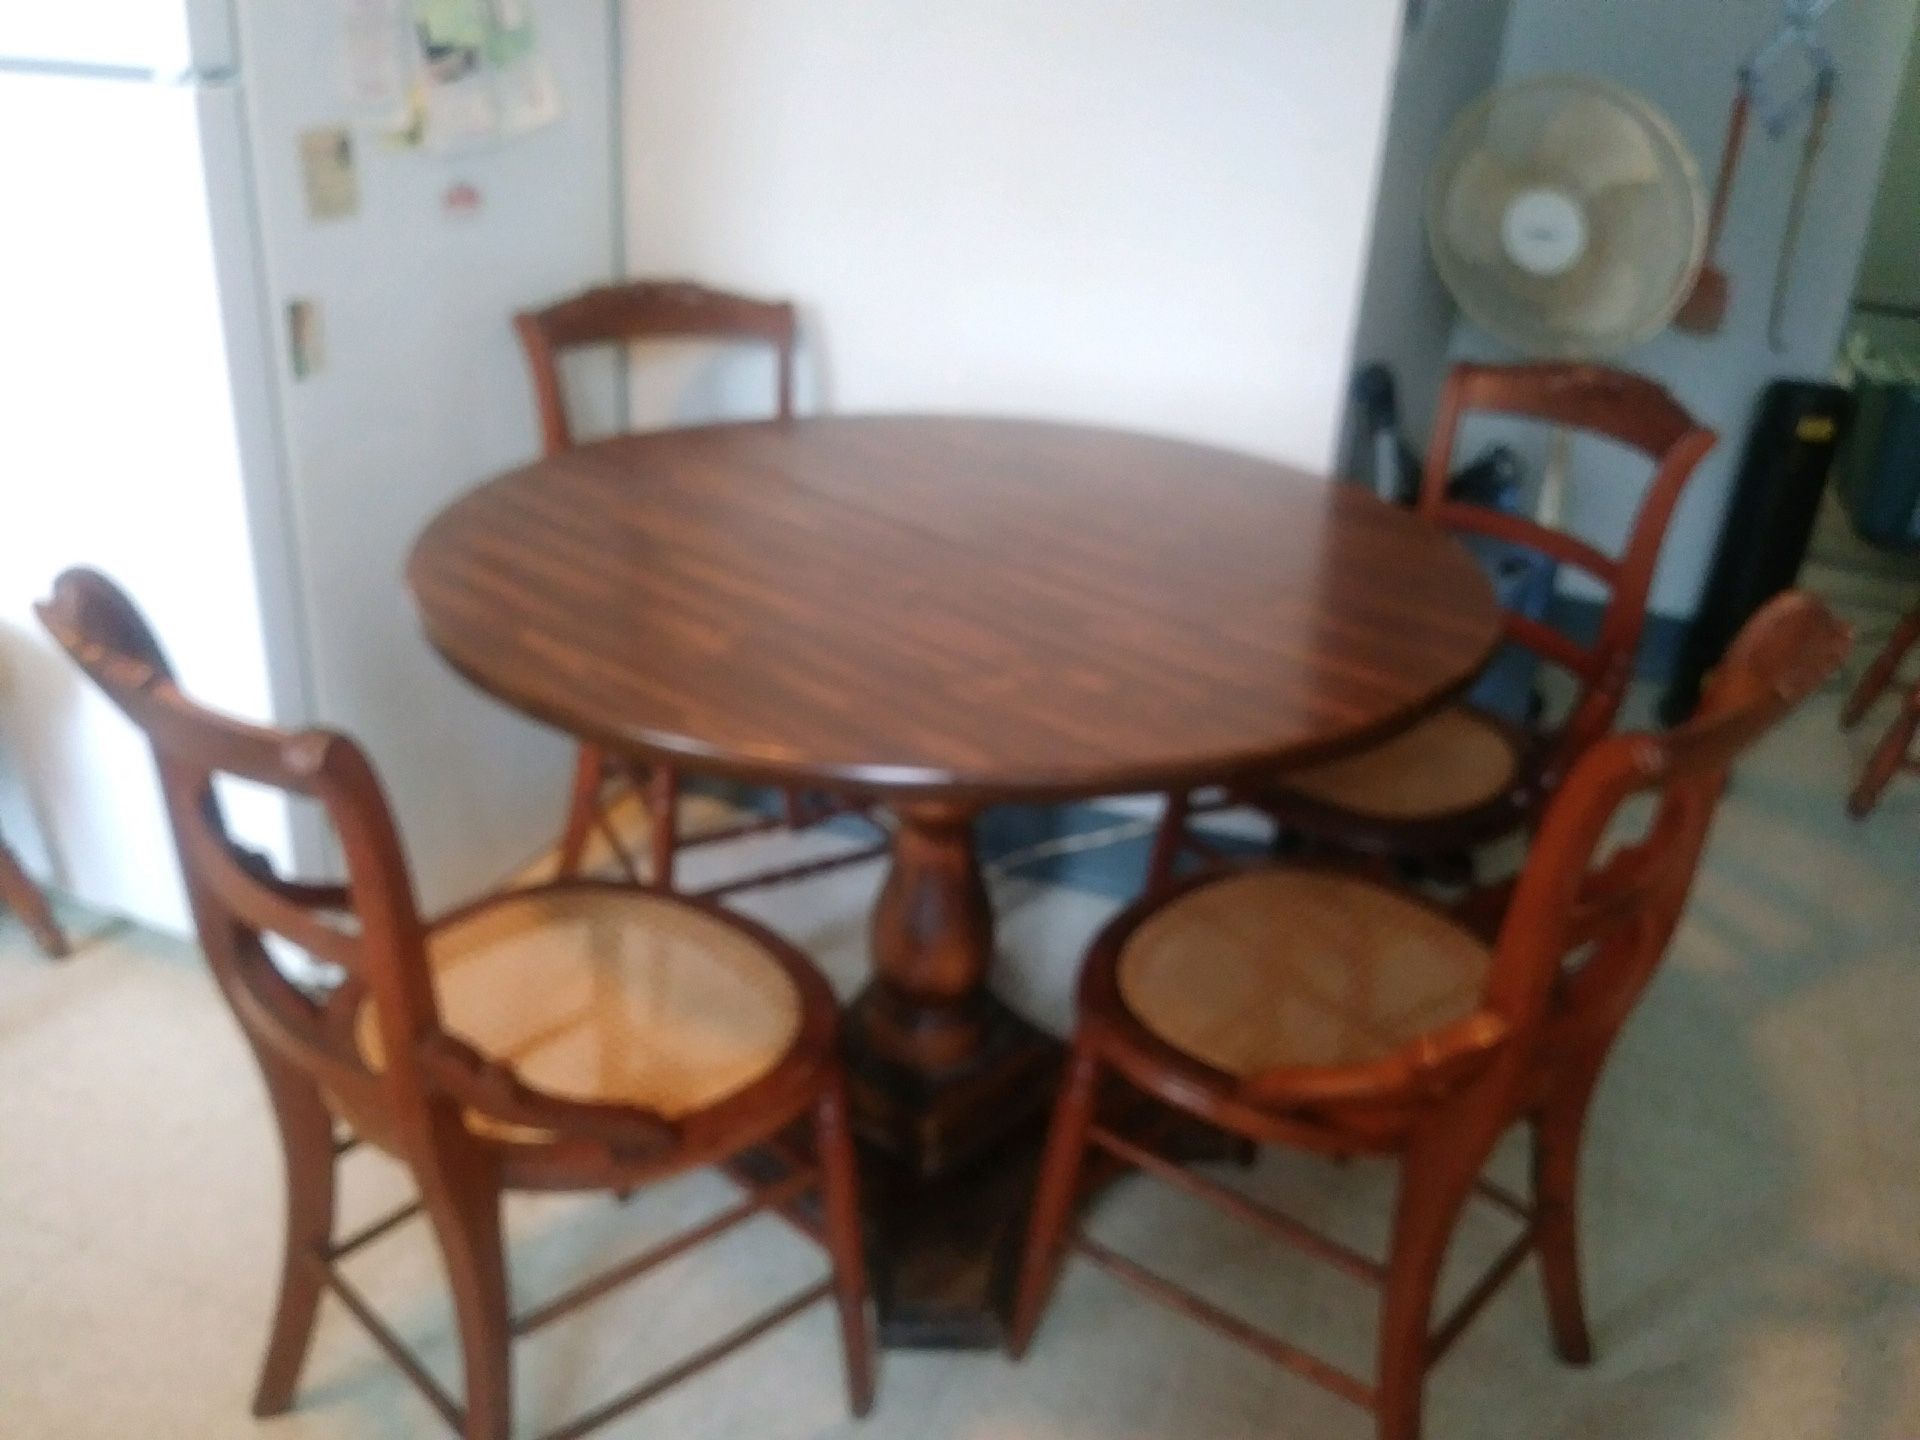 Dining table w/ chair